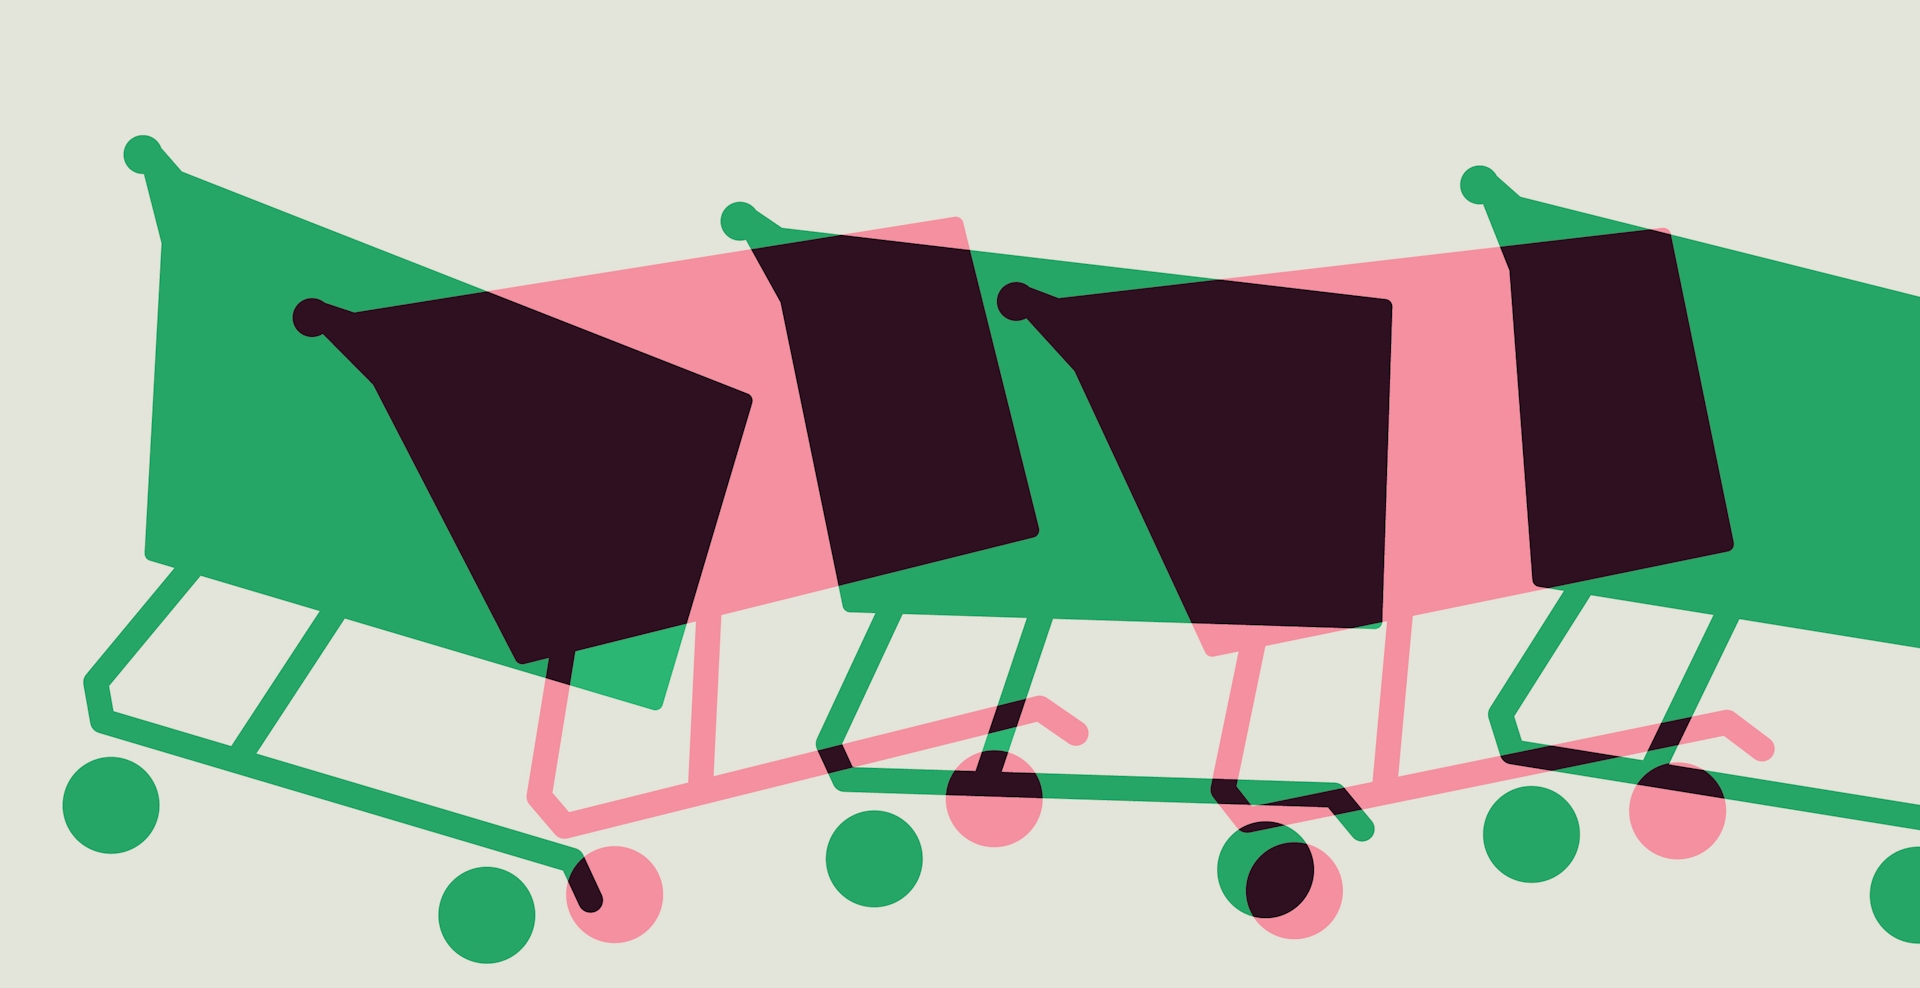 Pink and green shopping carts on a light background